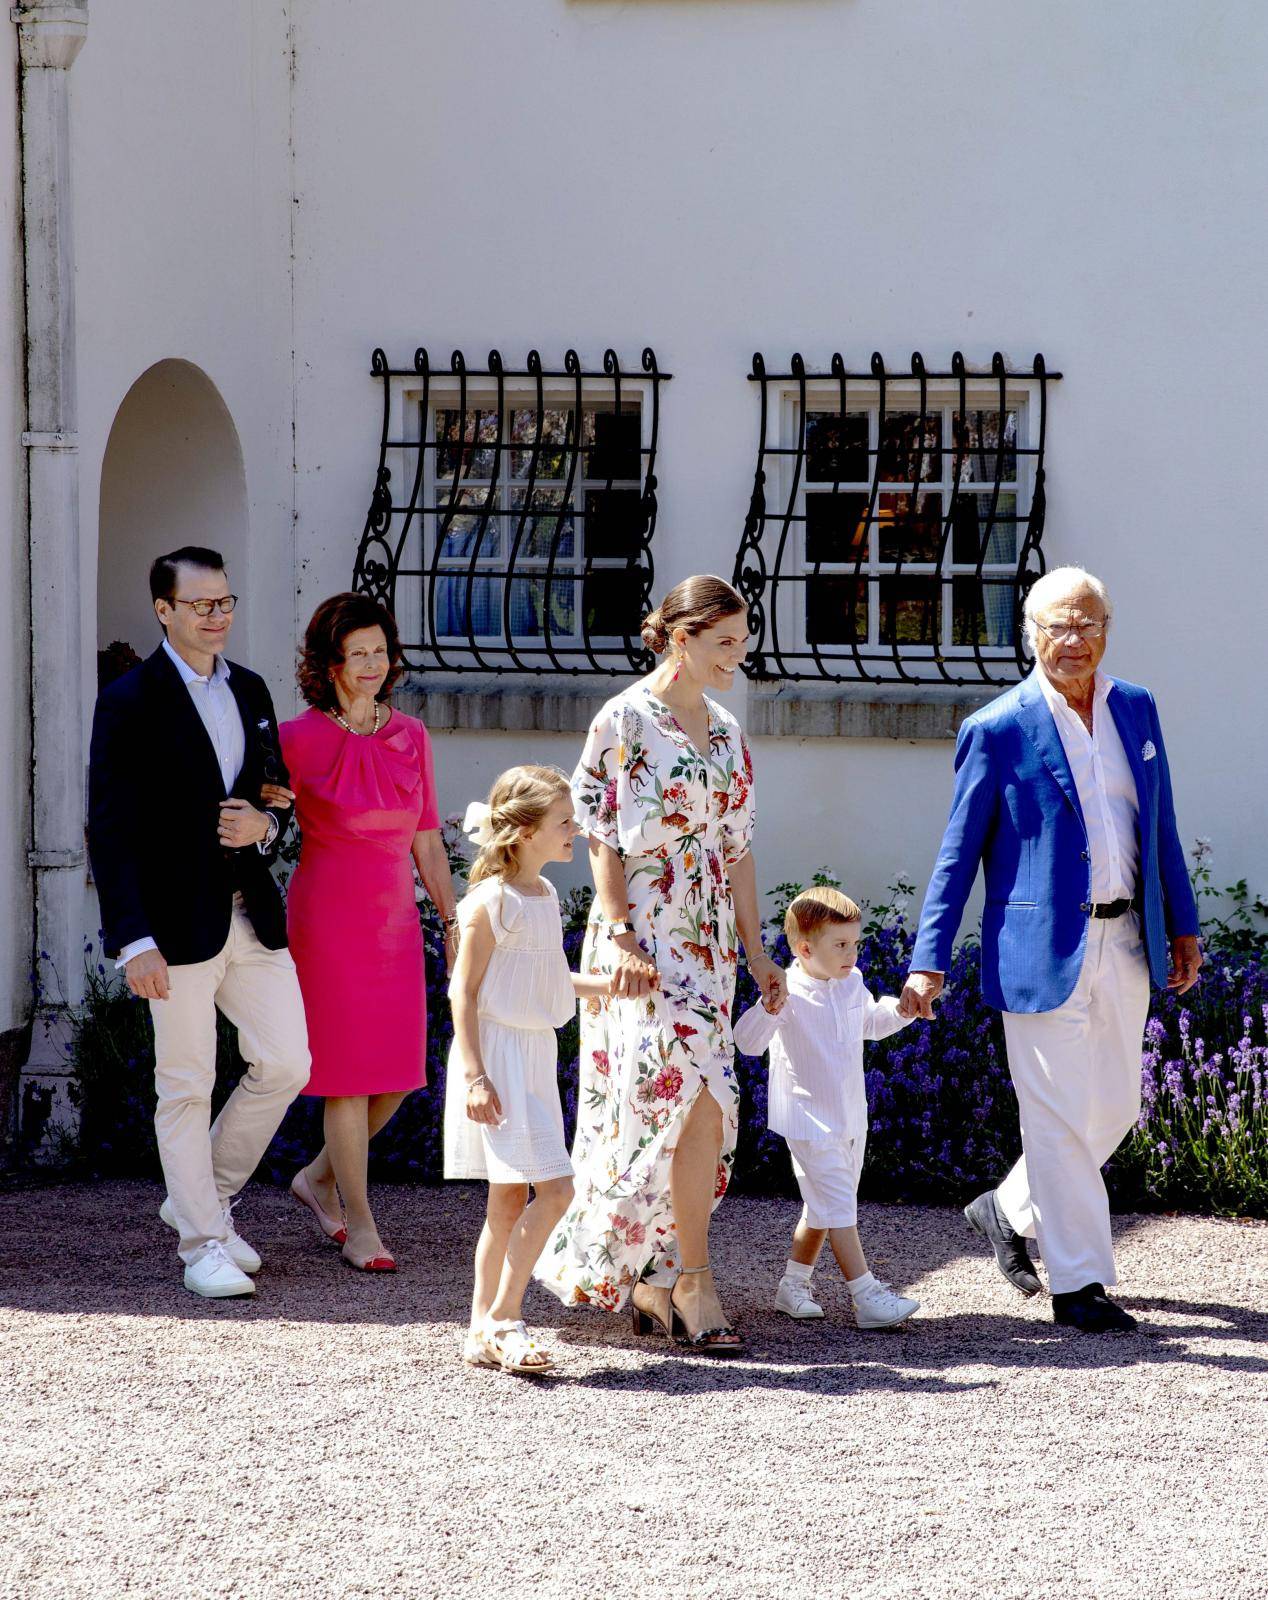 Crown Princess Victoria 42nd birthday Photo: Albert Nieboer / Netherlands OUT / Point De Vue OUT